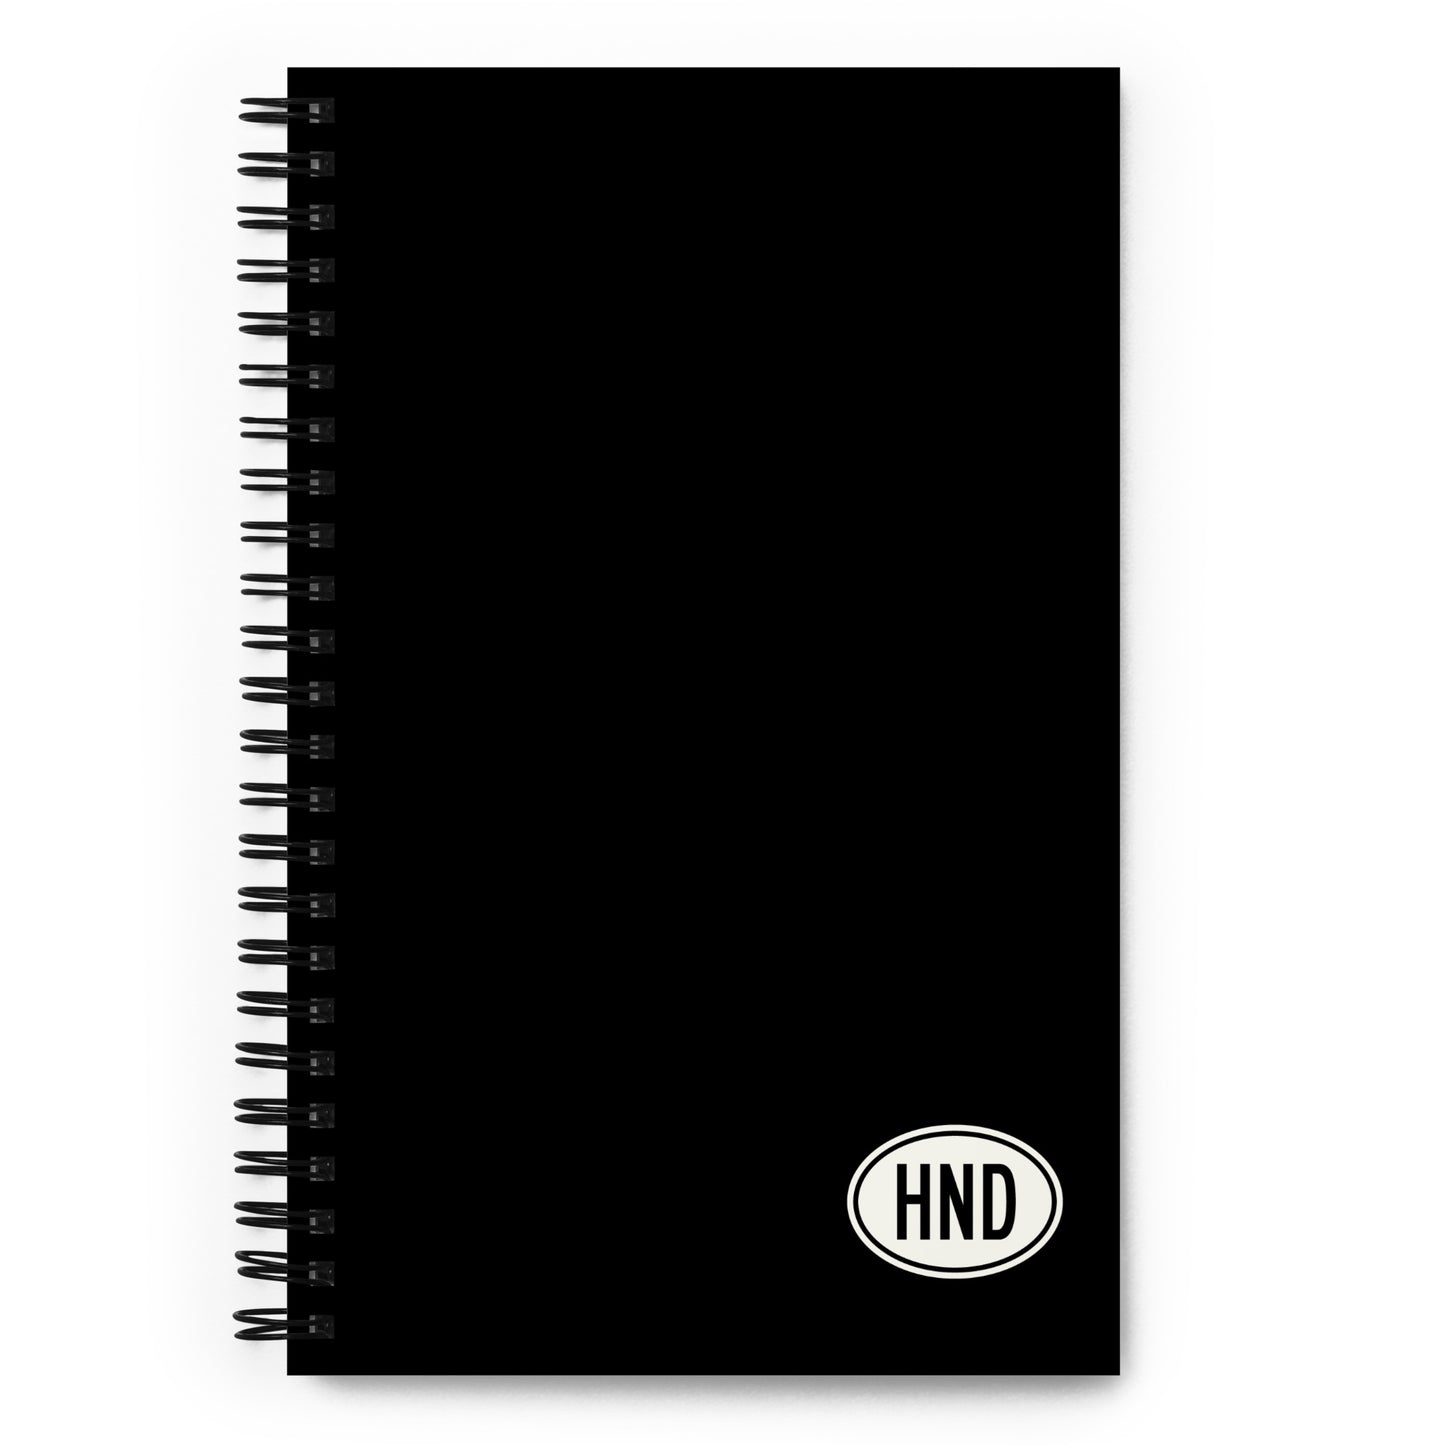 Unique Travel Gift Spiral Notebook - White Oval • HND Tokyo • YHM Designs - Image 01